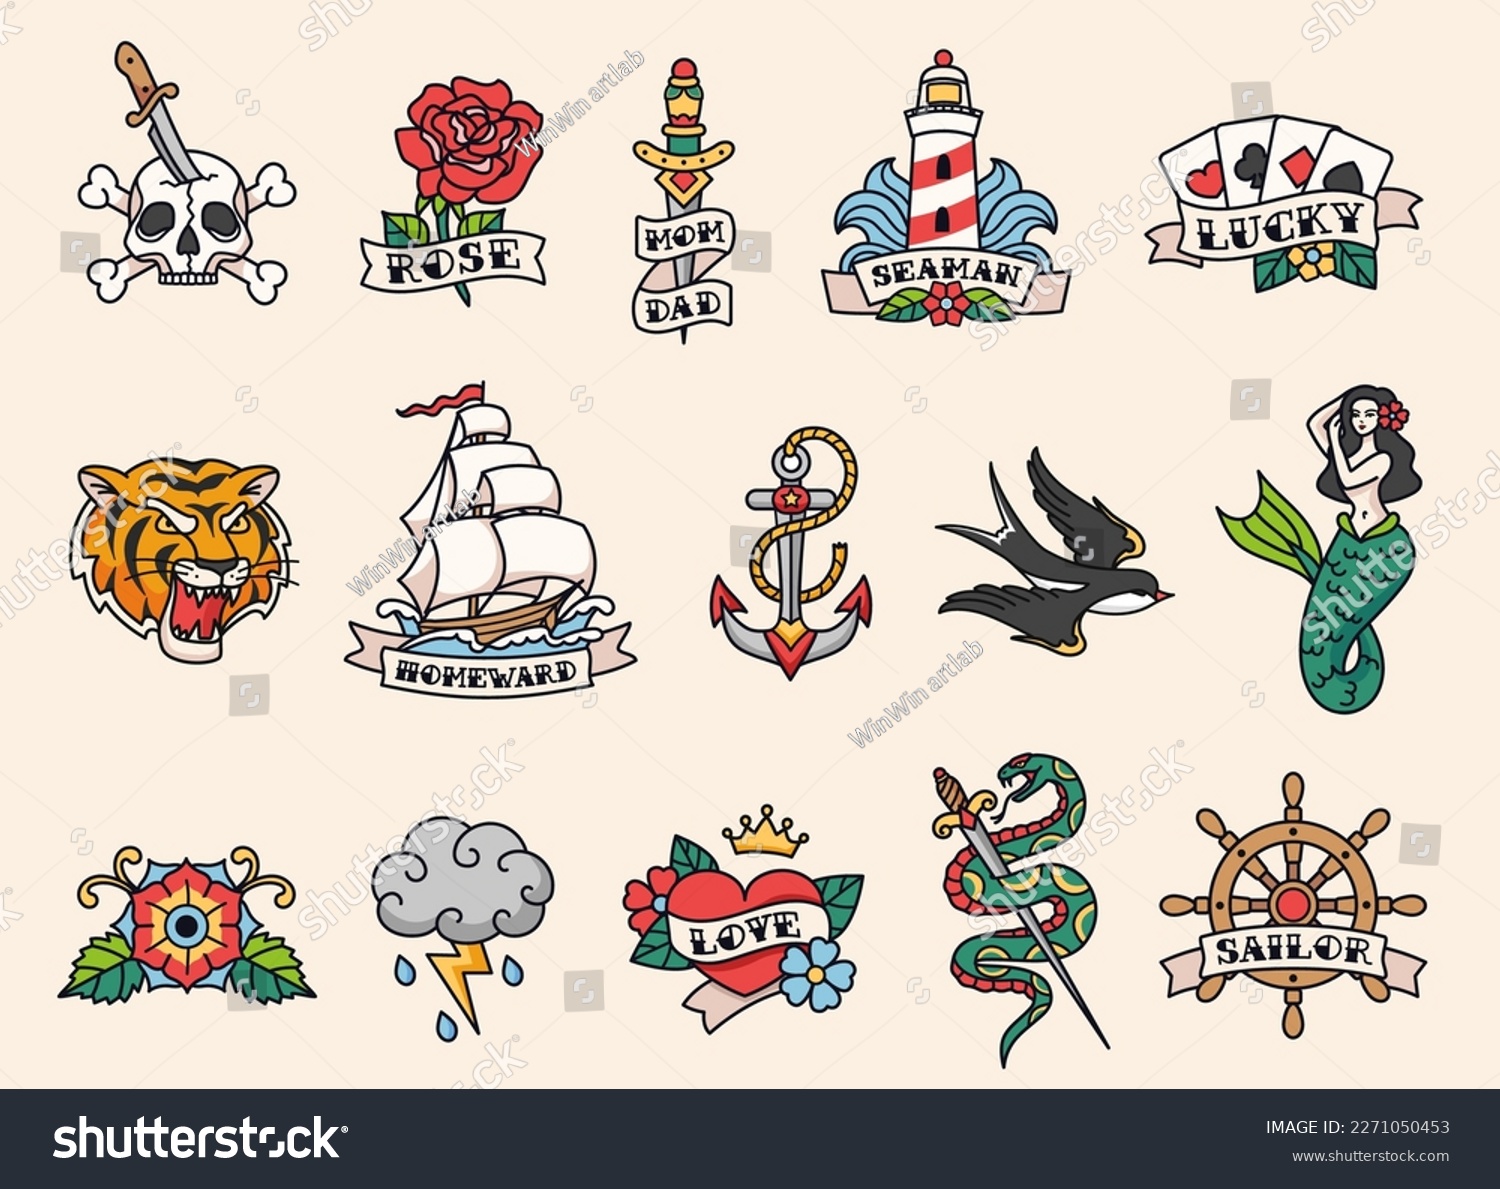 Sailor tattoo designs. Old school tattooing style, american traditional color tattoos with bold black outlines. Hand drawn vector illustration set. Colorful stickers as mermaid, rose and lighthouse #2271050453